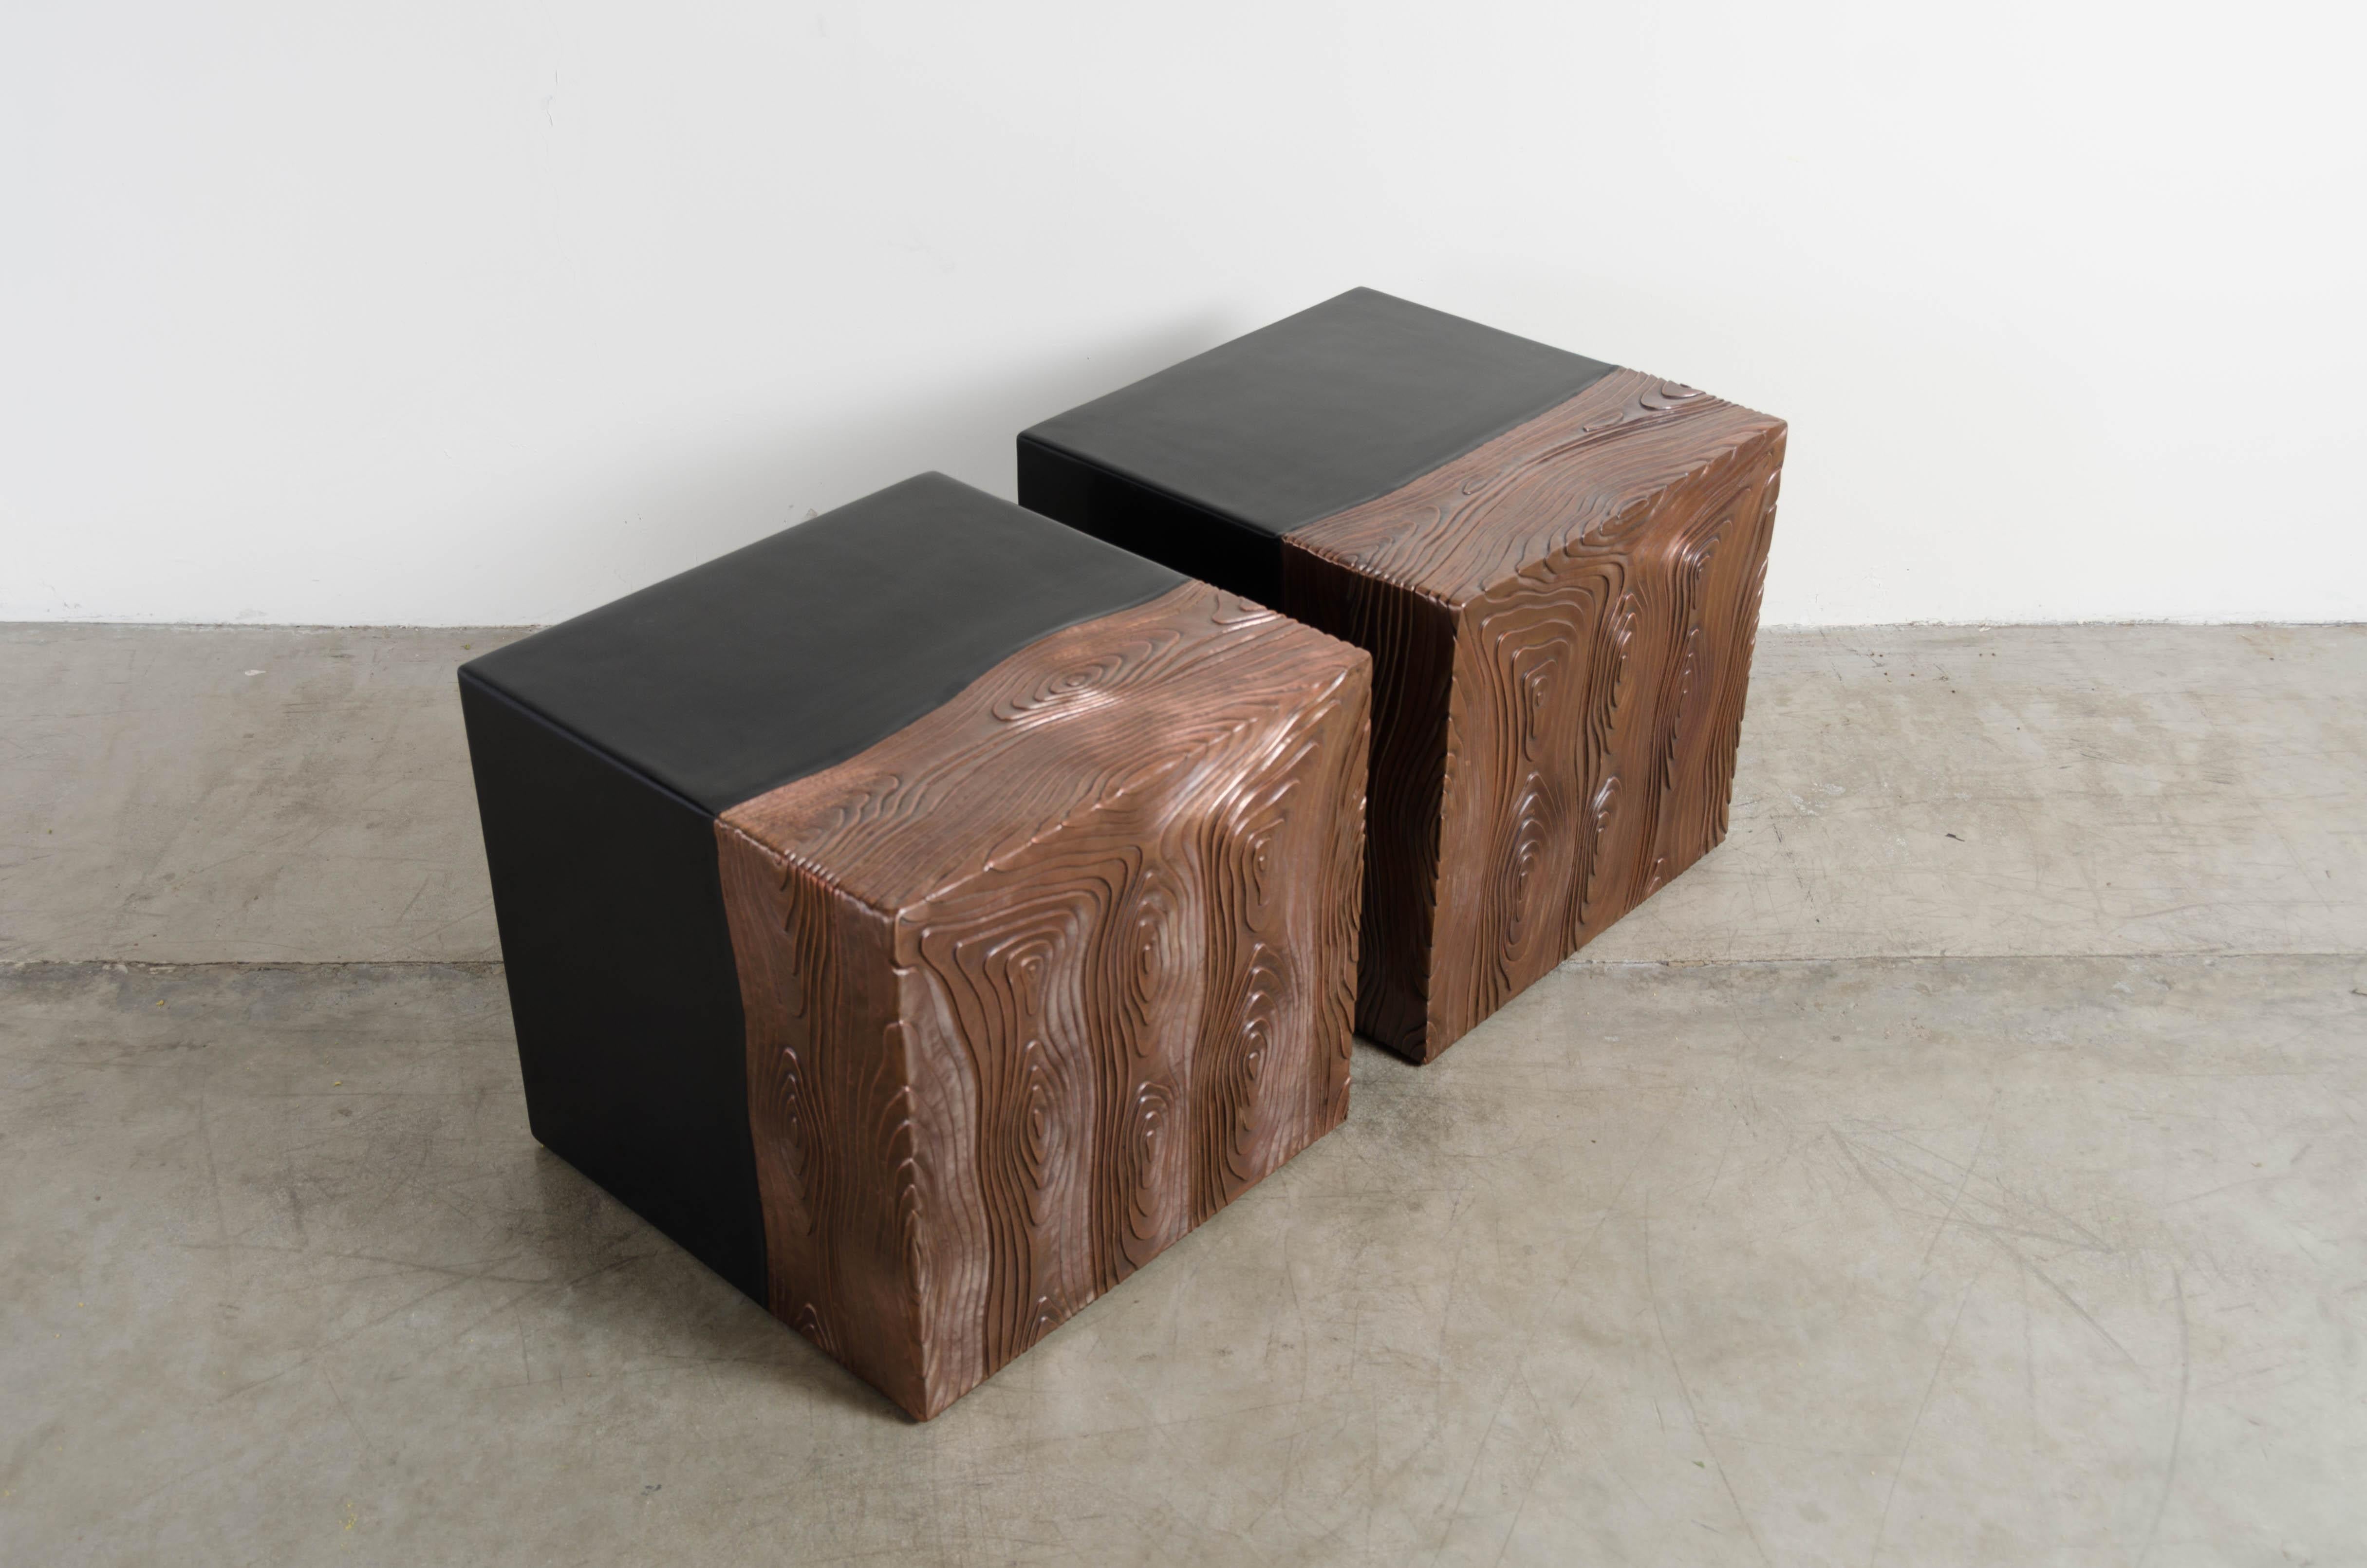 Square Seat with Woodgrain Design, Black Lacquer, Copper, Set of 2 by Robert Kuo In New Condition For Sale In Los Angeles, CA